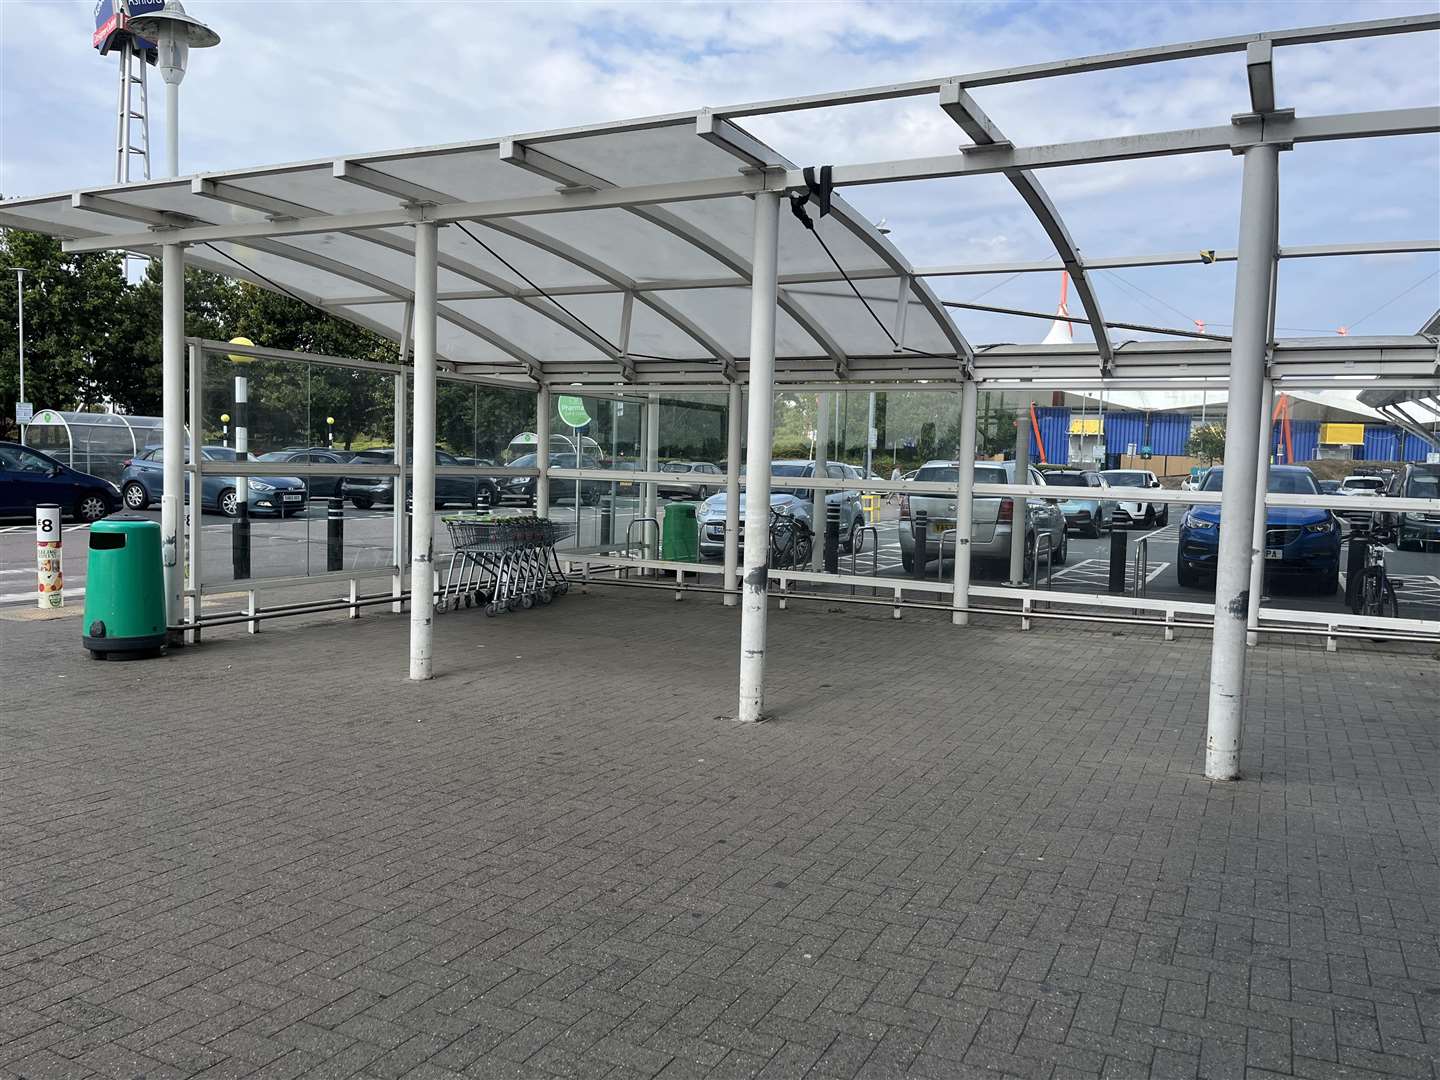 One shopper who went to the Ashford Asda earlier in the week had to walk to three trolley parks before finding one